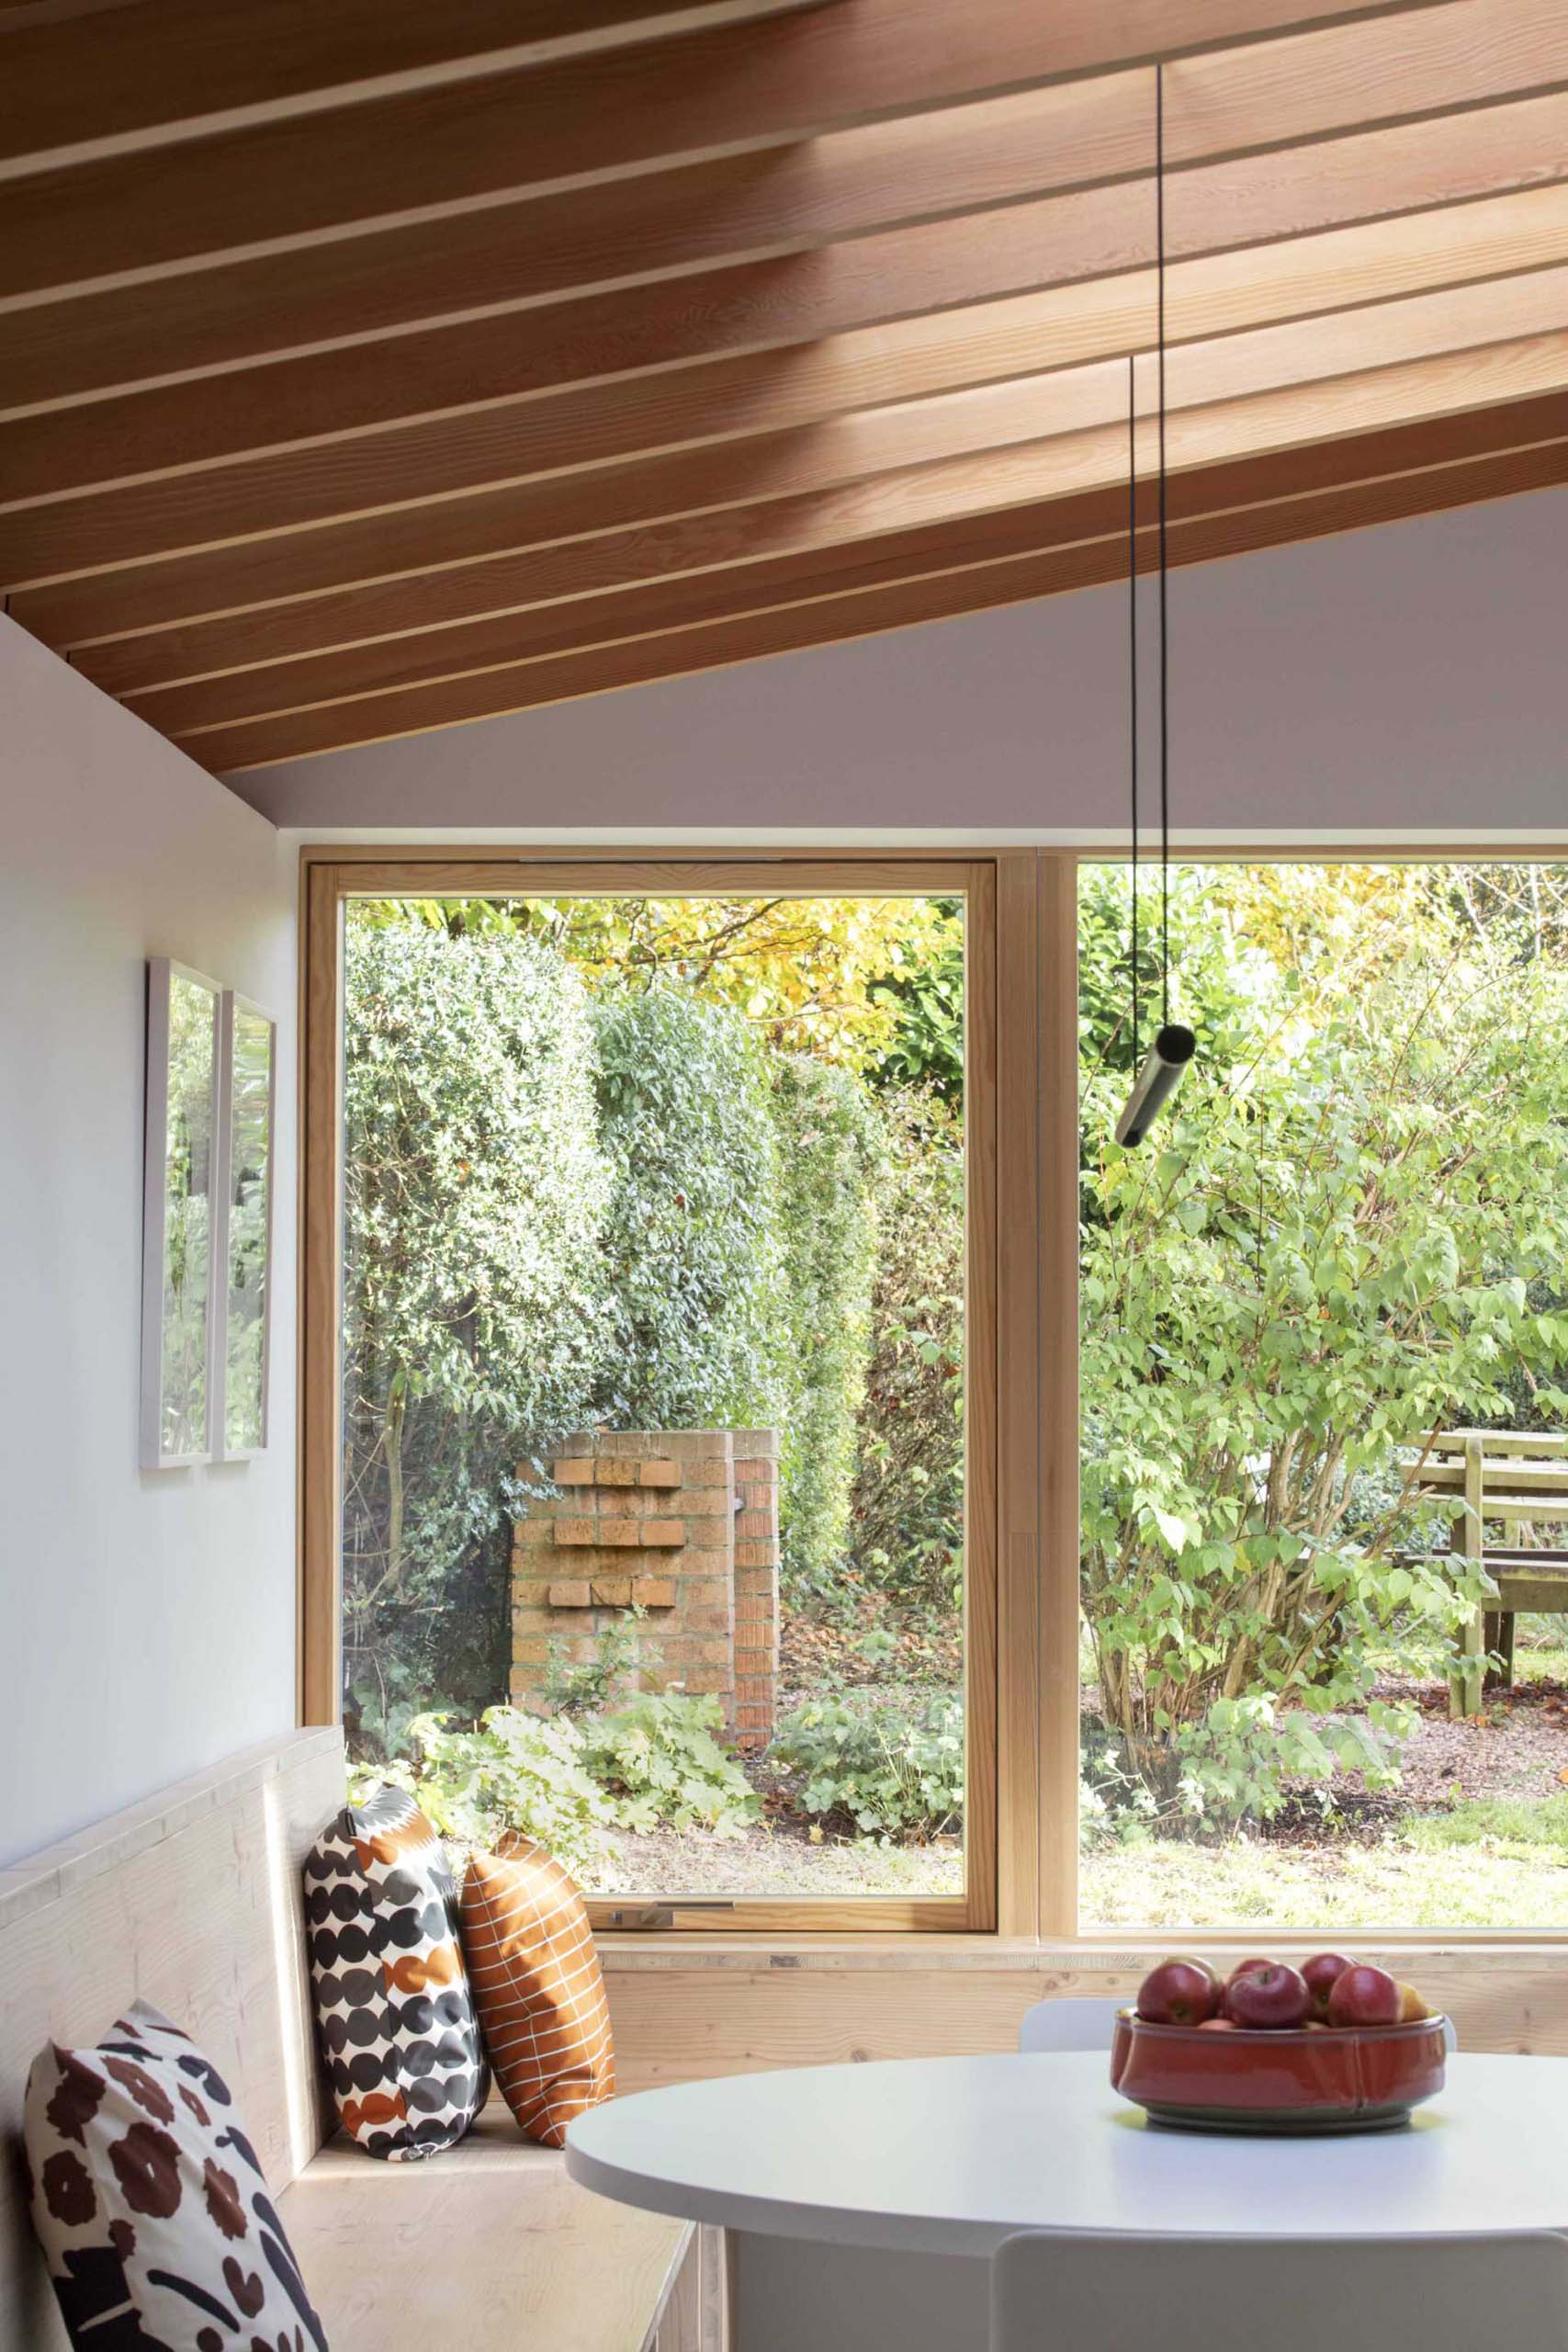 A contemporary extension with exposed timber overhead, soft white walls, microcement floor, and wrap-around window bench.